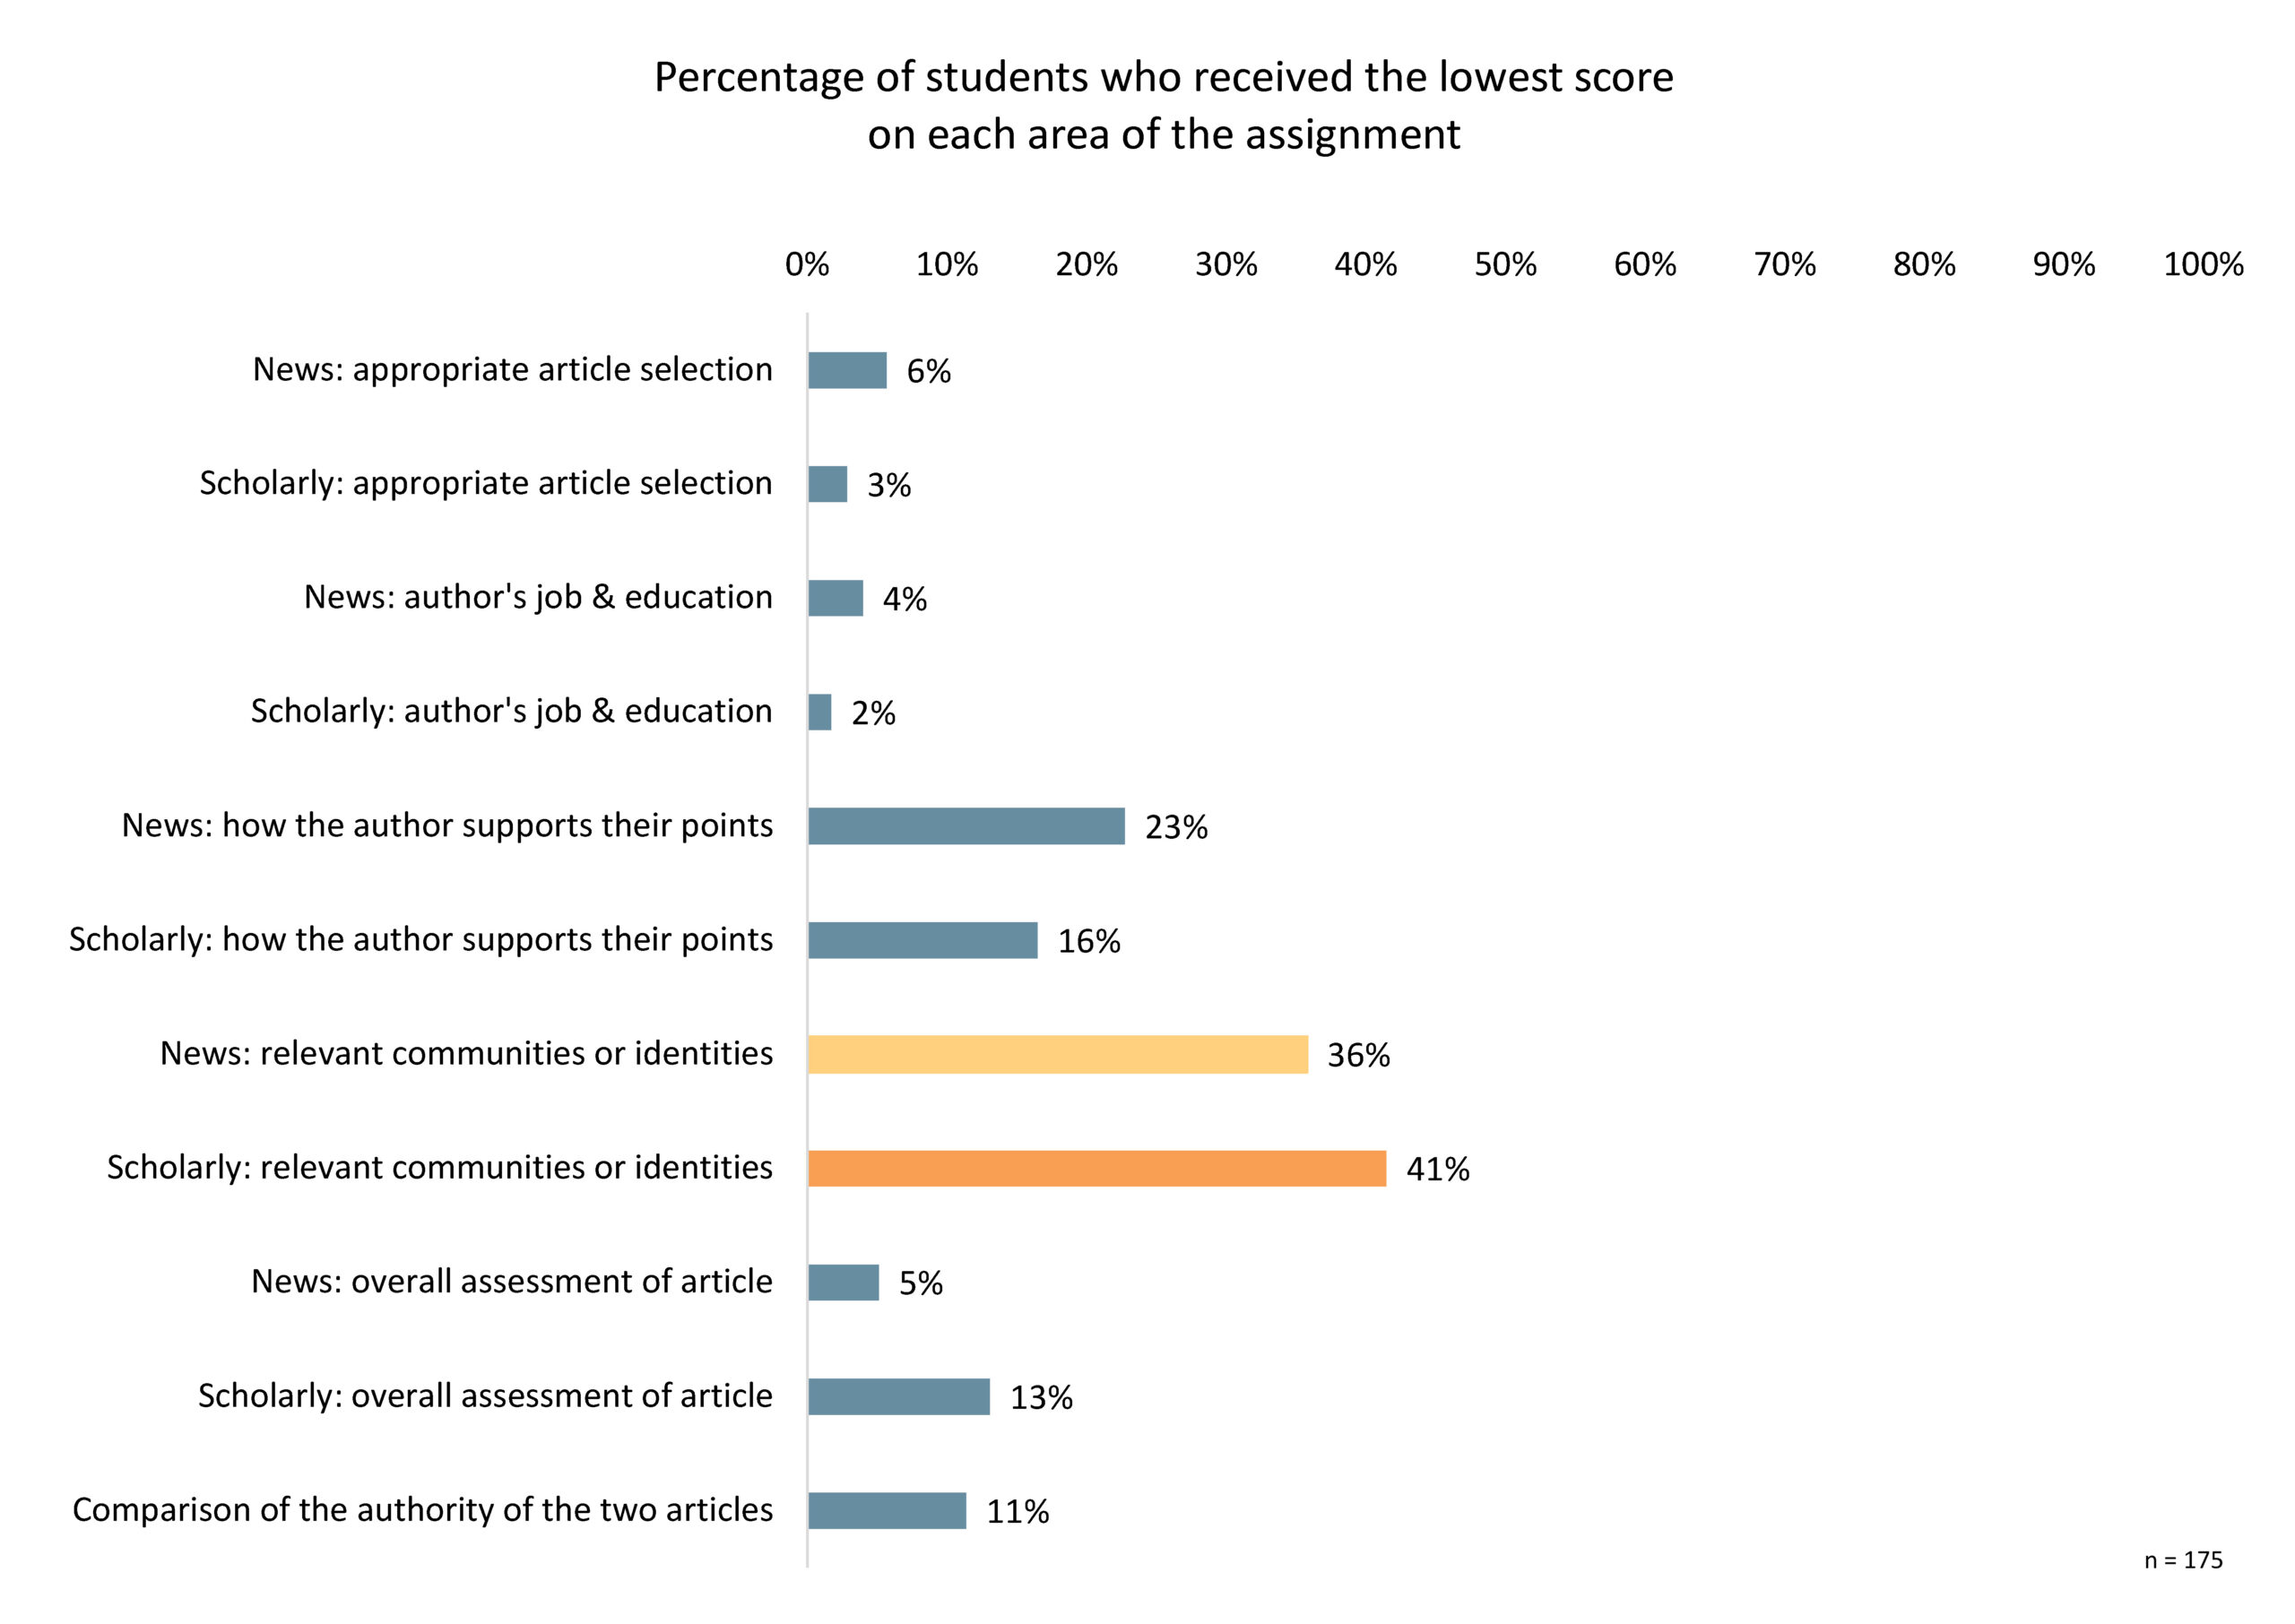 Bar chart showing two areas with the highest percentage of students receiving the lowest possible score